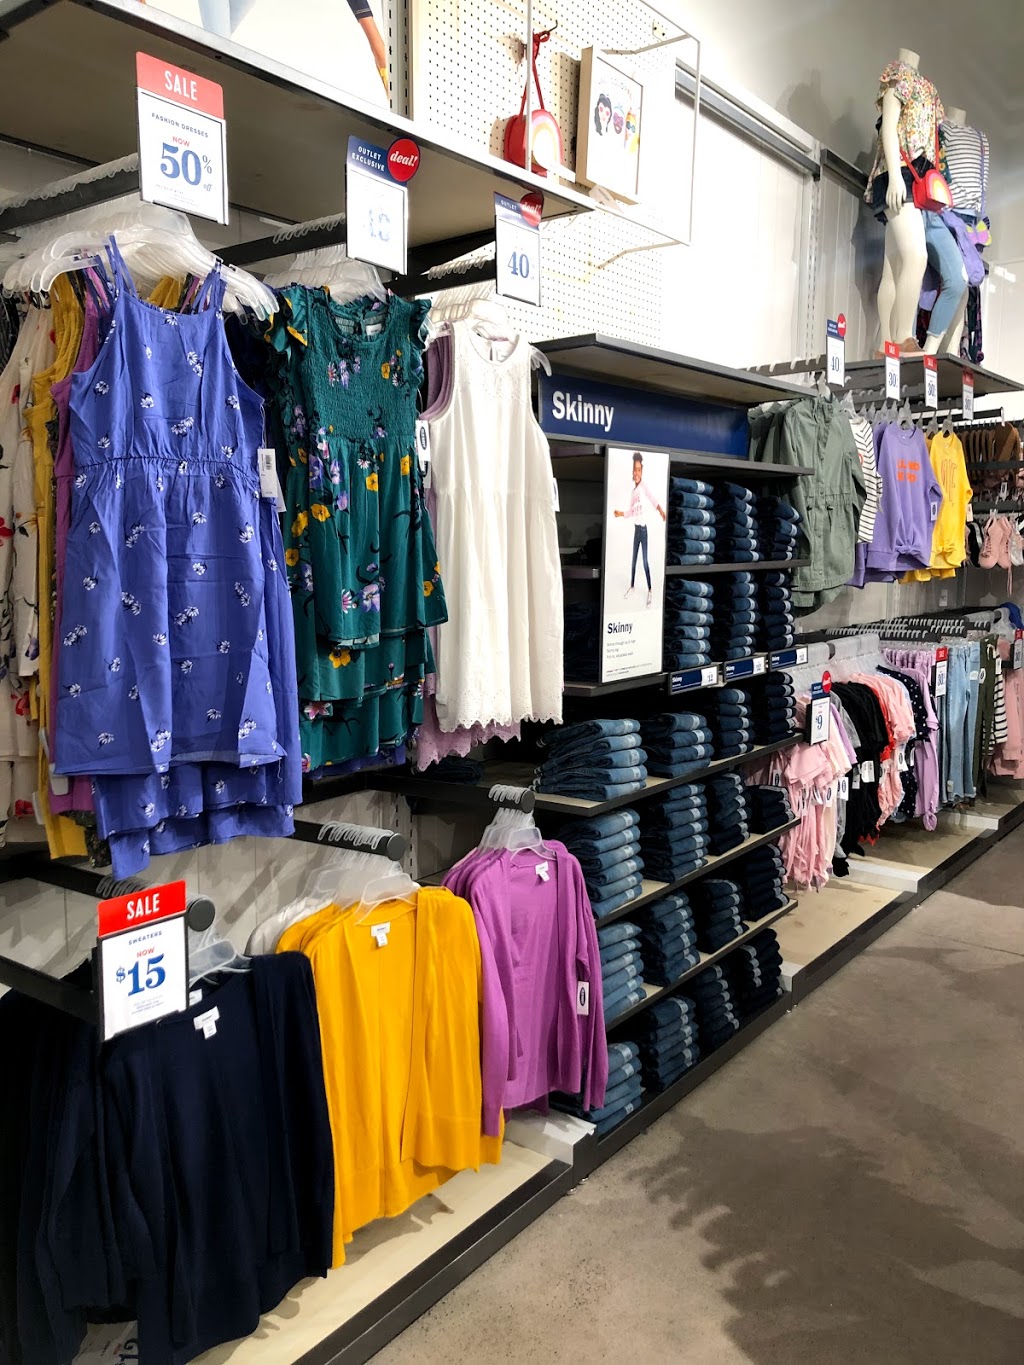 Old Navy Outlet | 34 Hector Gate, Dartmouth, NS B3B 0C2, Canada | Phone: (902) 481-2002